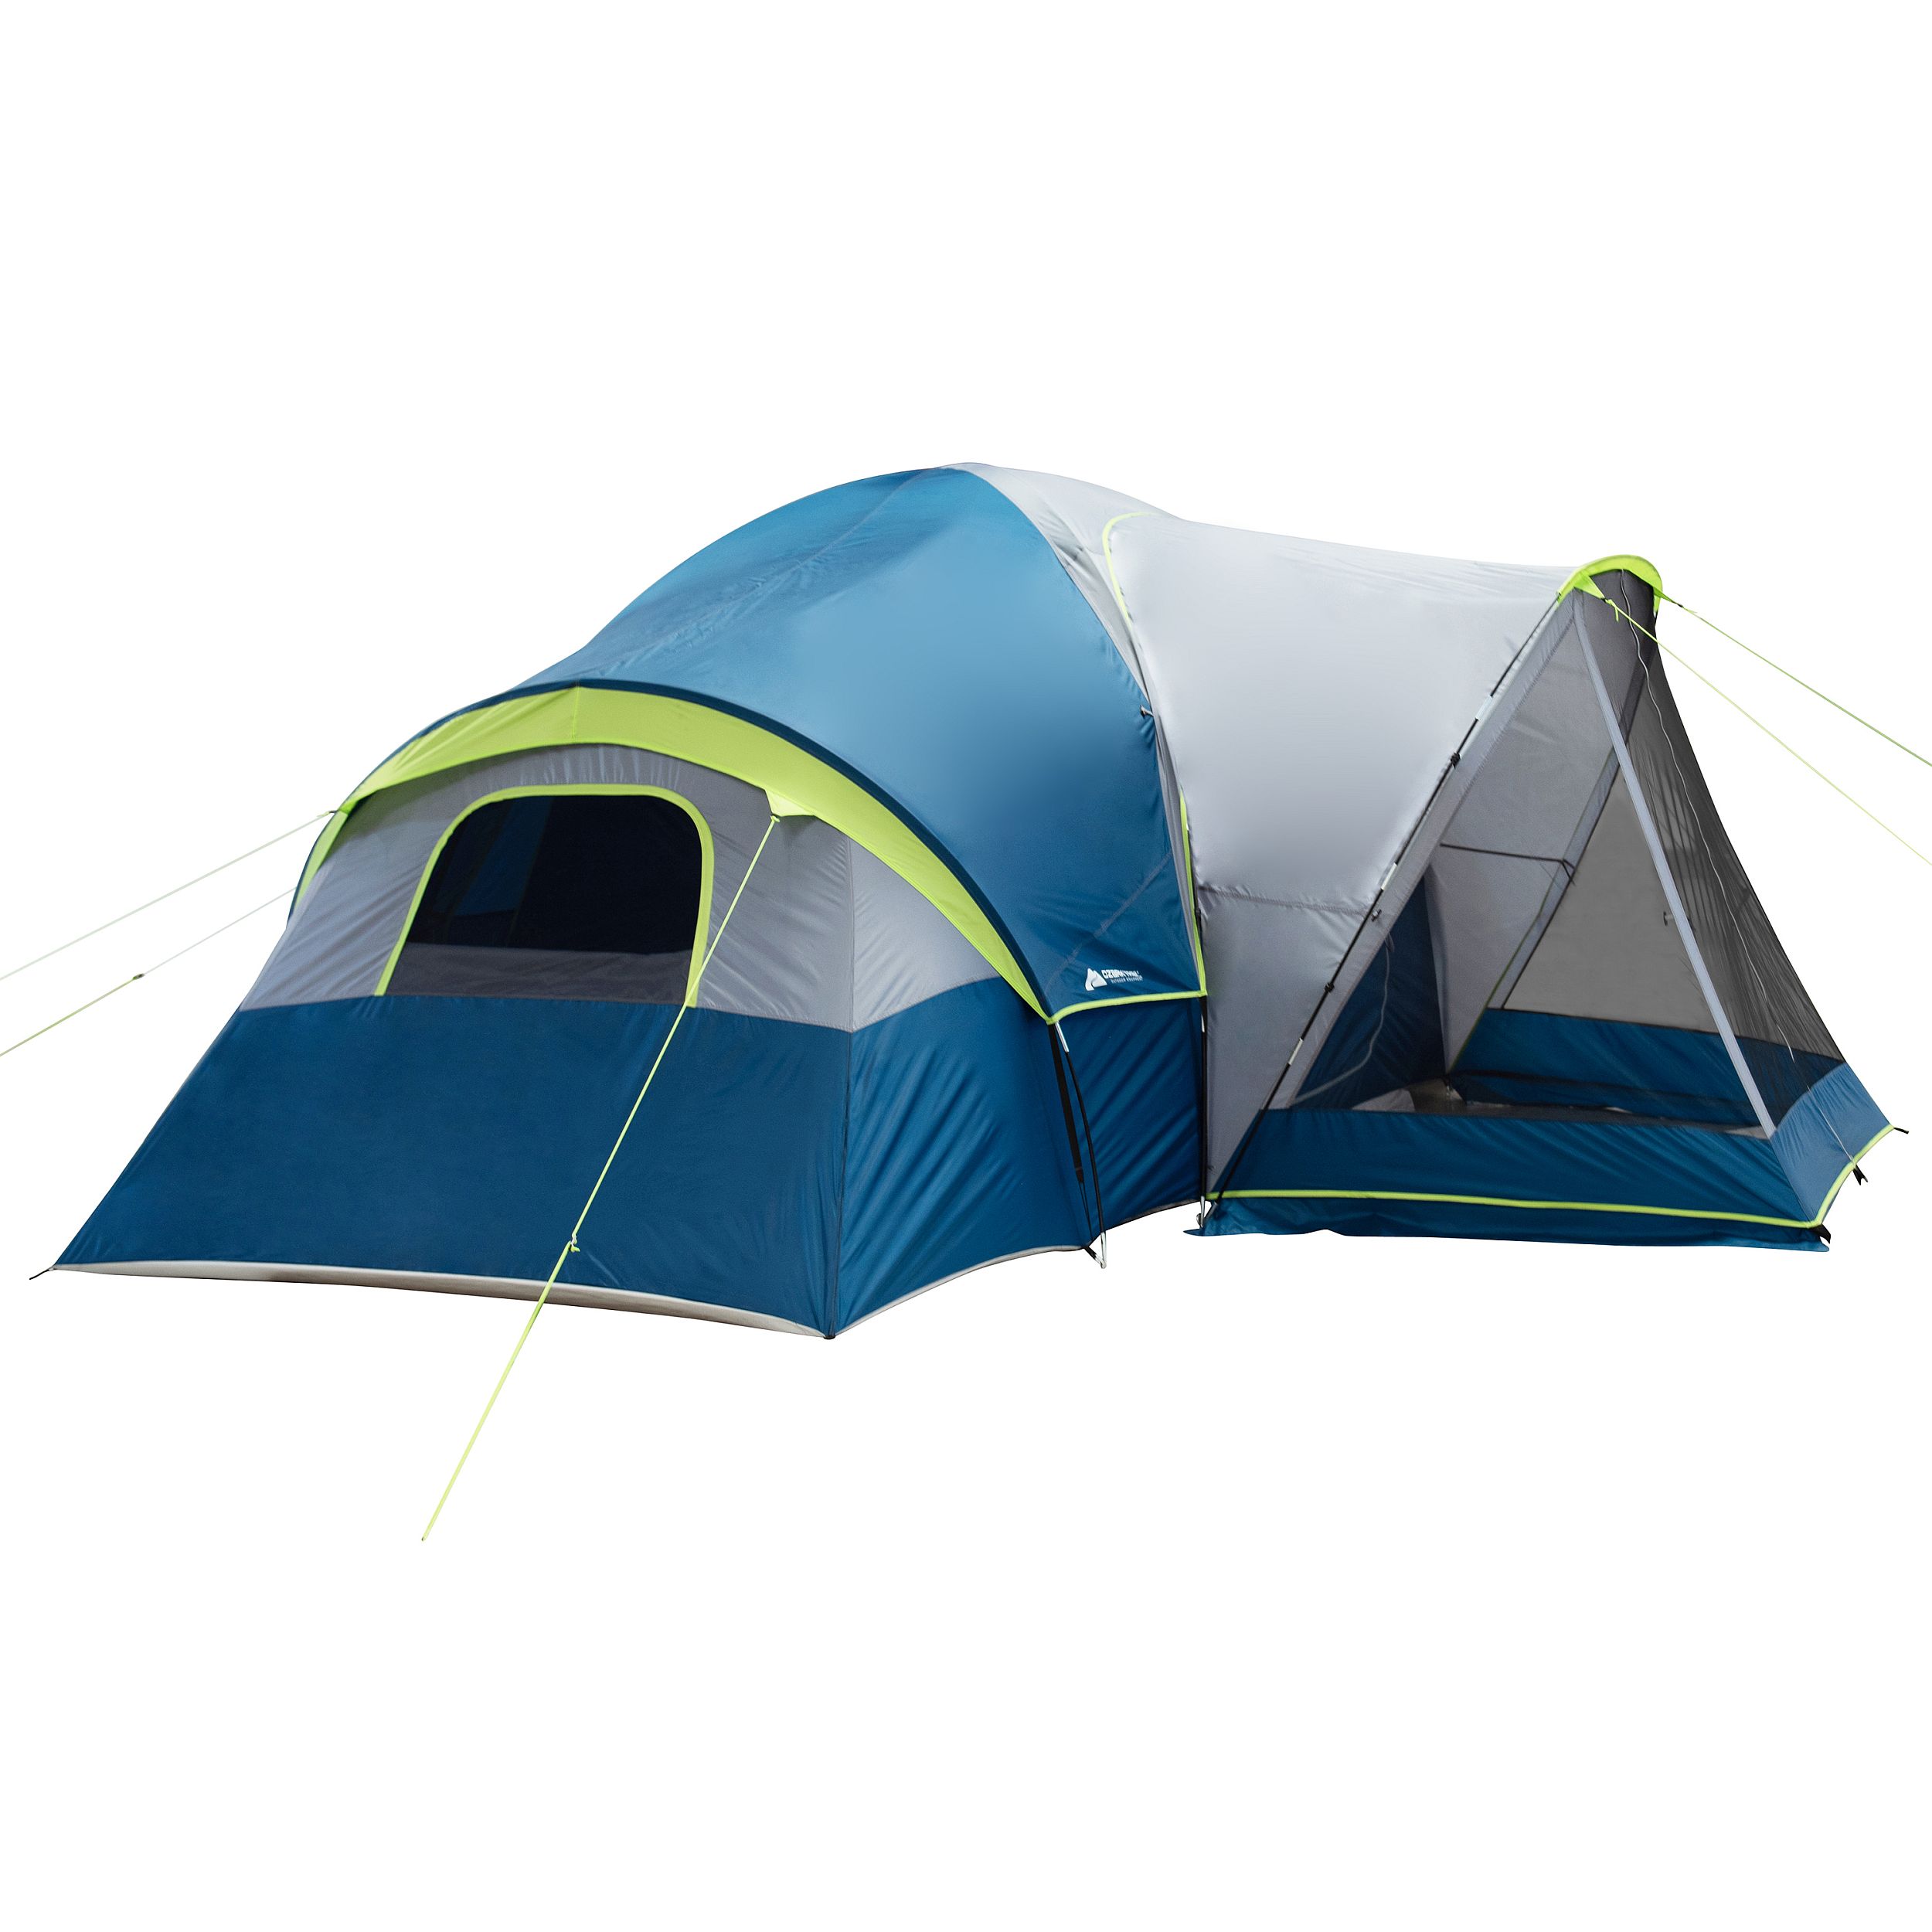 Ozark Trail 10-Person Modified Dome Tent with Screen Porch - image 4 of 13